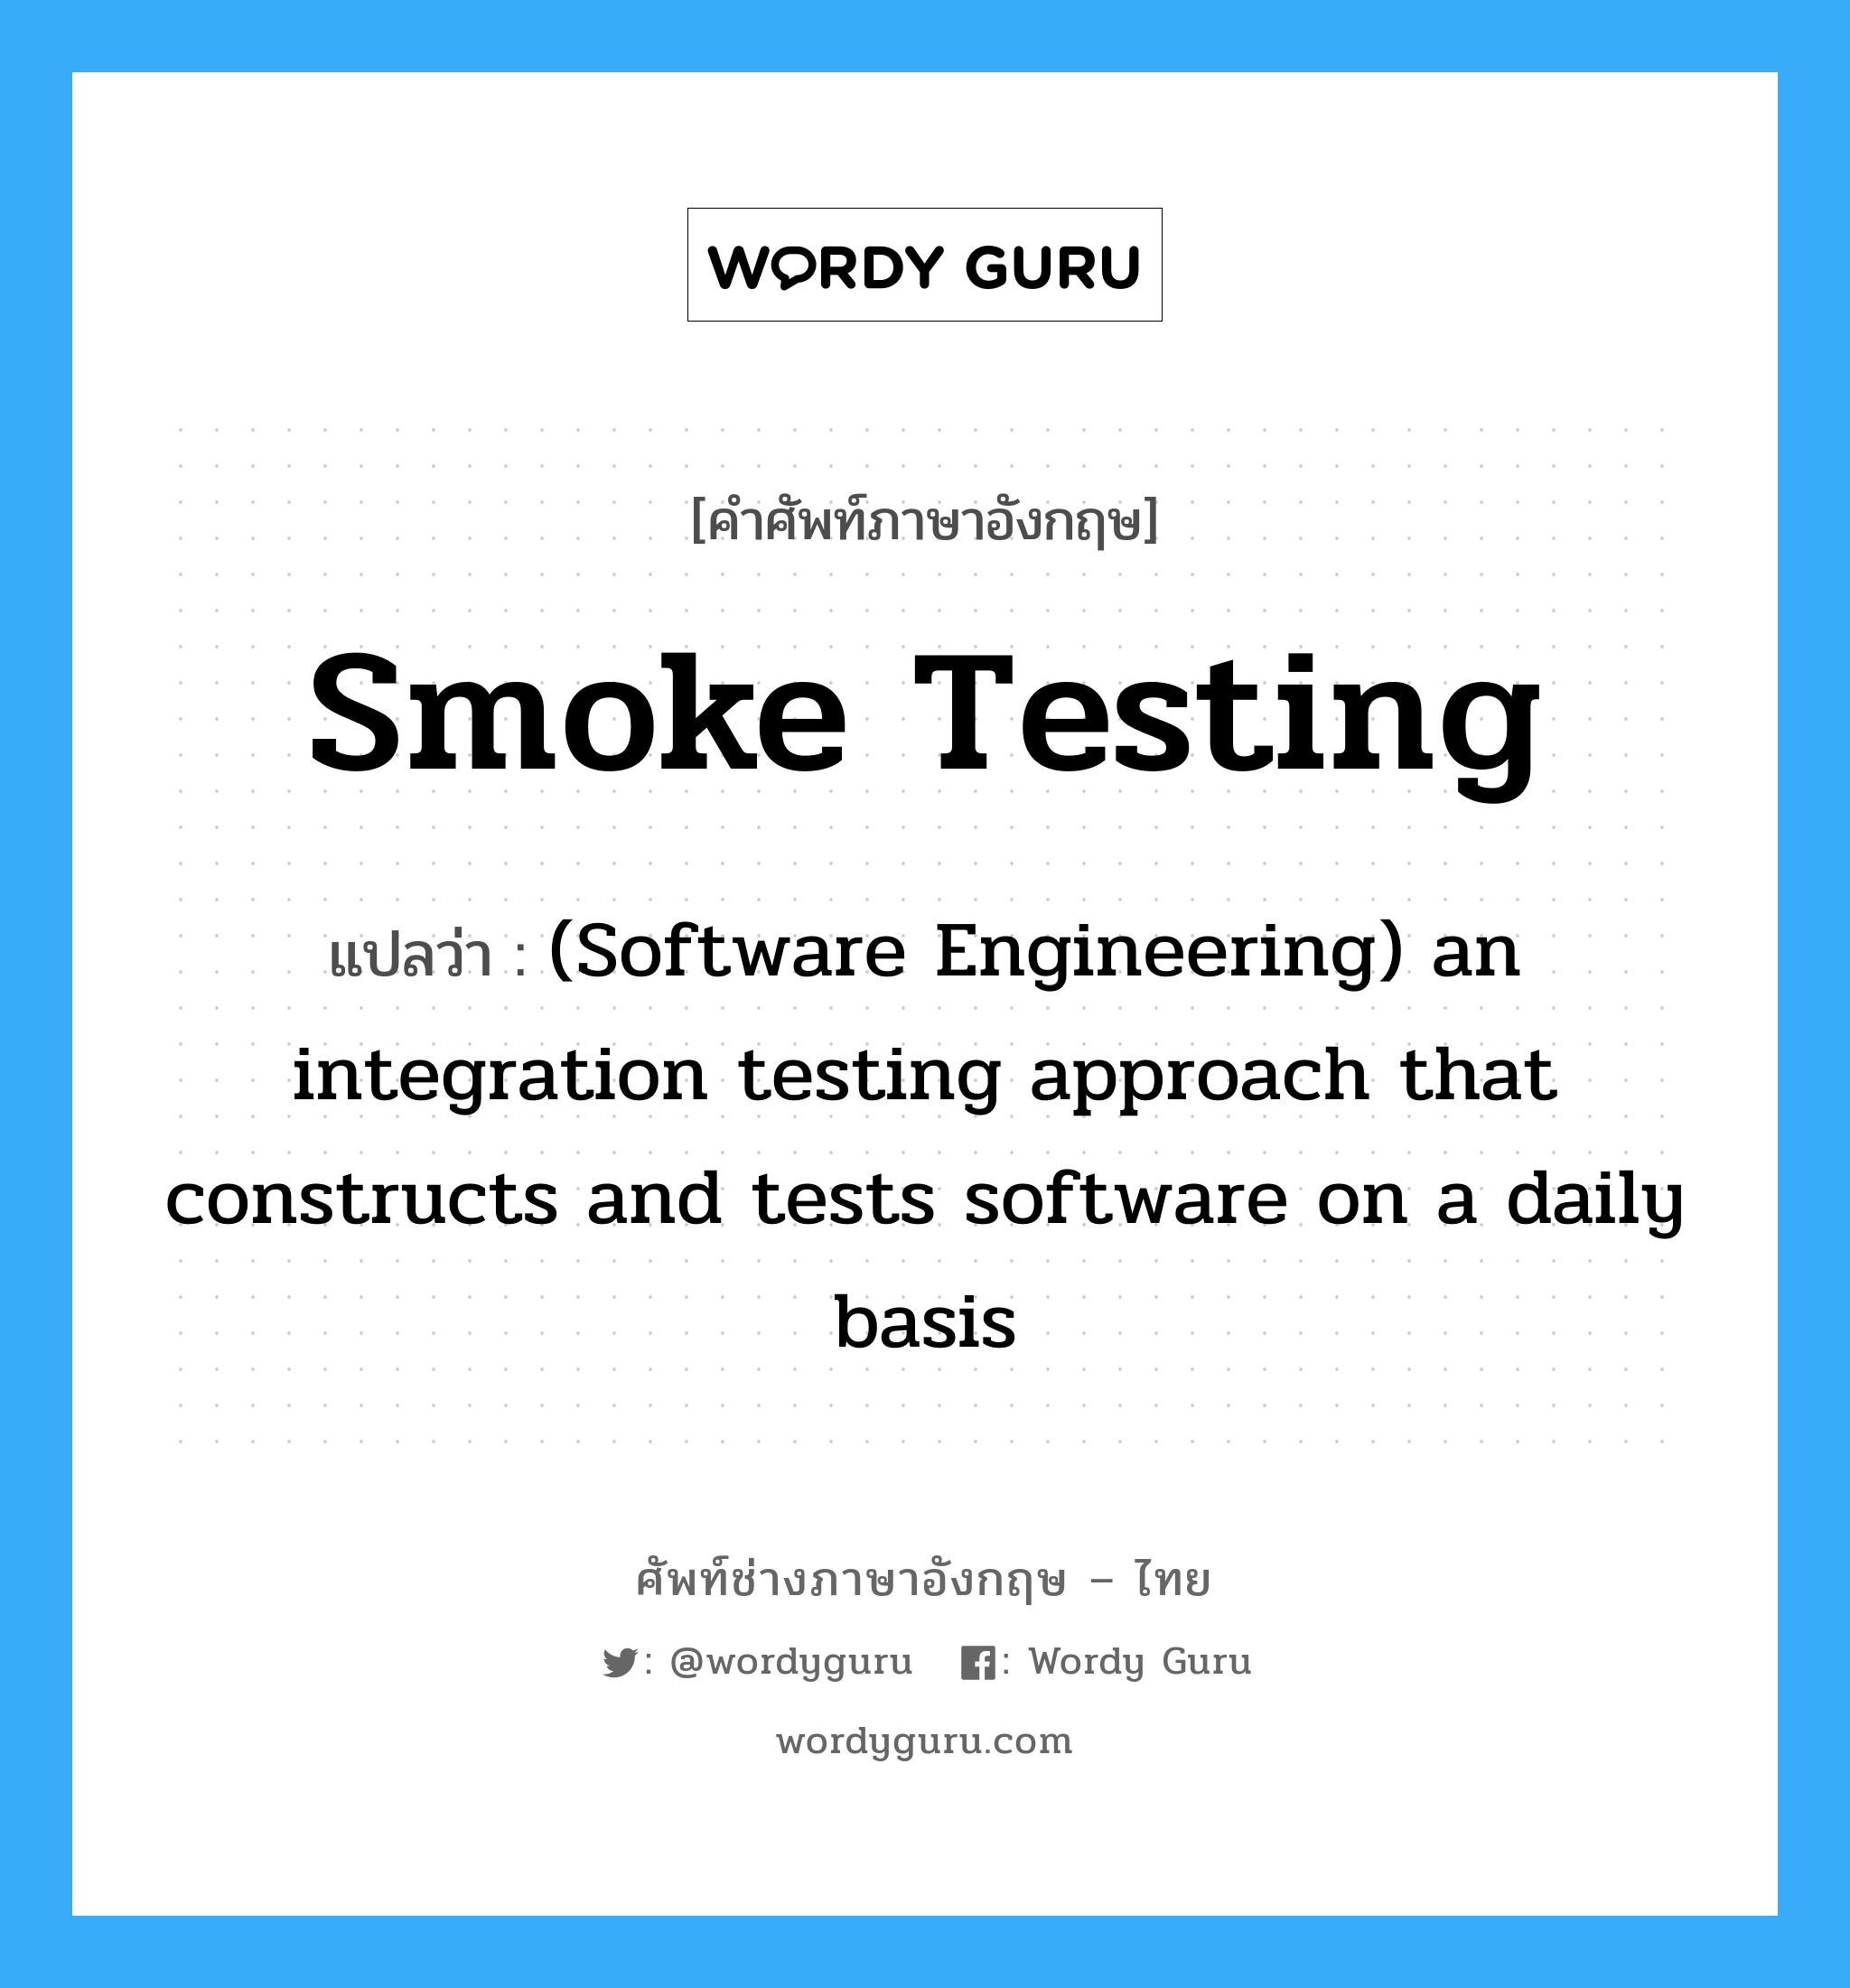 (Software Engineering) an integration testing approach that constructs and tests software on a daily basis ภาษาอังกฤษ?, คำศัพท์ช่างภาษาอังกฤษ - ไทย (Software Engineering) an integration testing approach that constructs and tests software on a daily basis คำศัพท์ภาษาอังกฤษ (Software Engineering) an integration testing approach that constructs and tests software on a daily basis แปลว่า Smoke testing